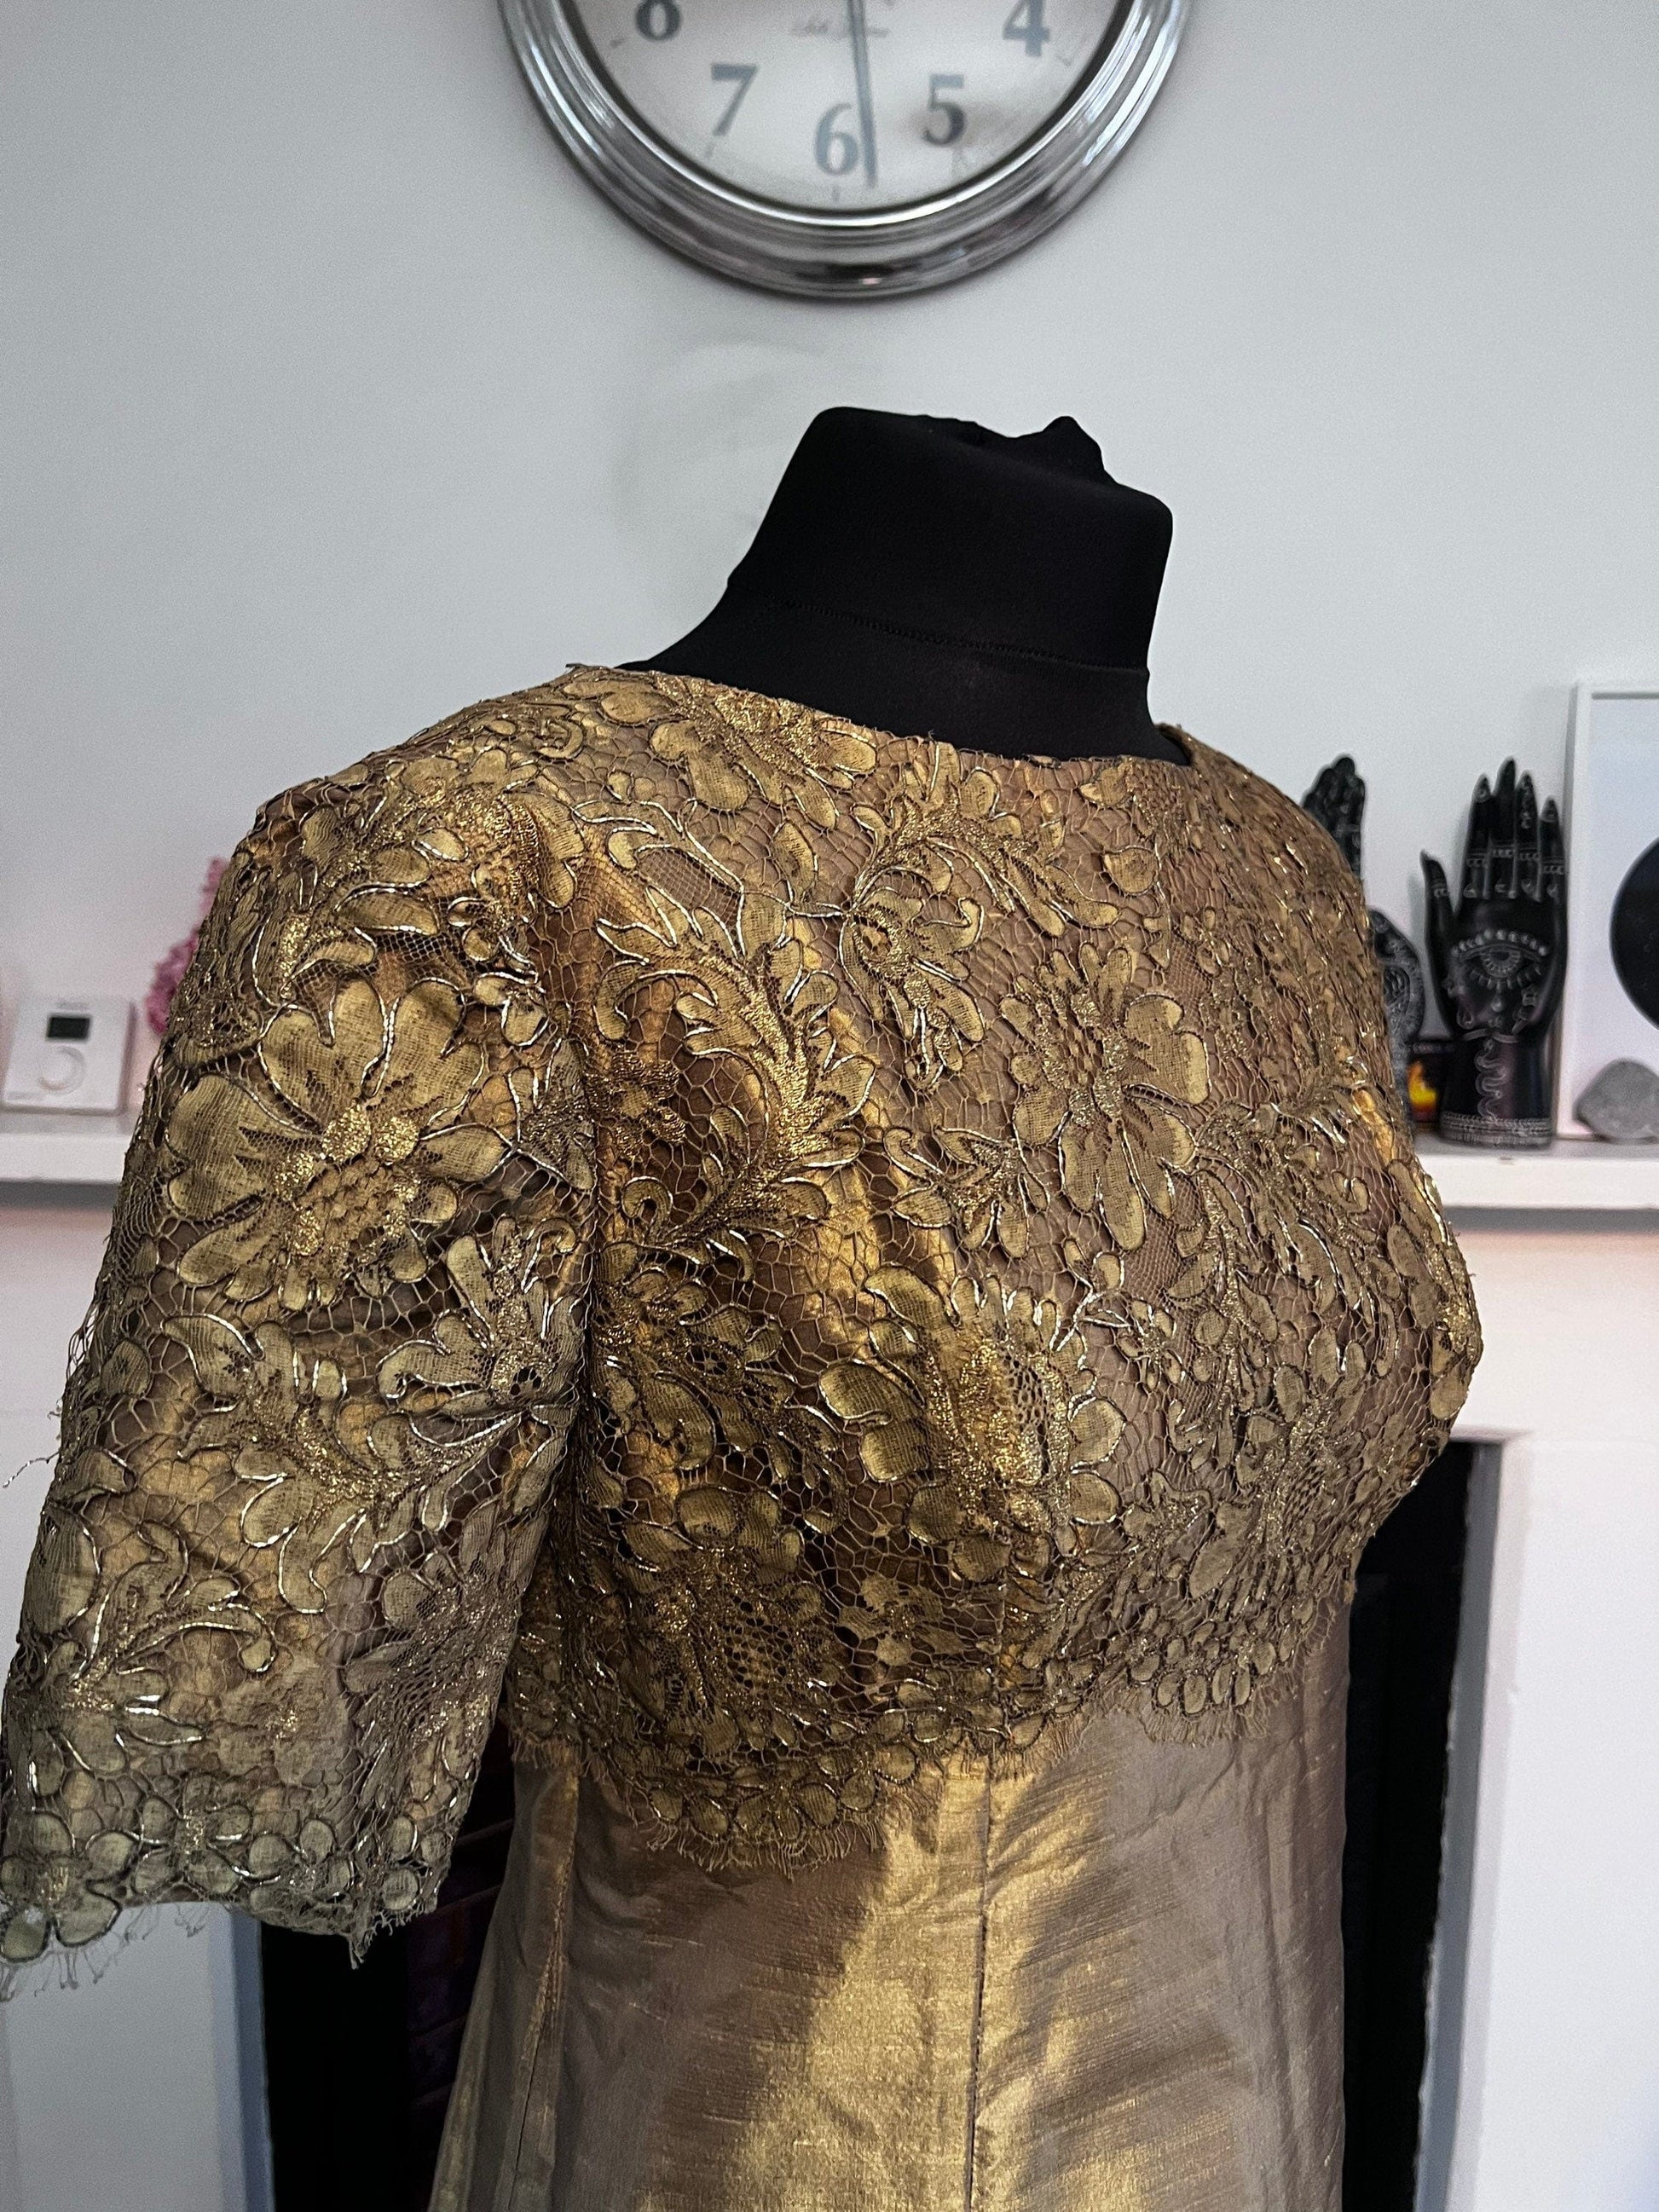 Vintage Silk Dress Bronze Gold Silk Lace Bodice Dress with gold thread lace details Immaculate Condition - 1950s Shot Silk